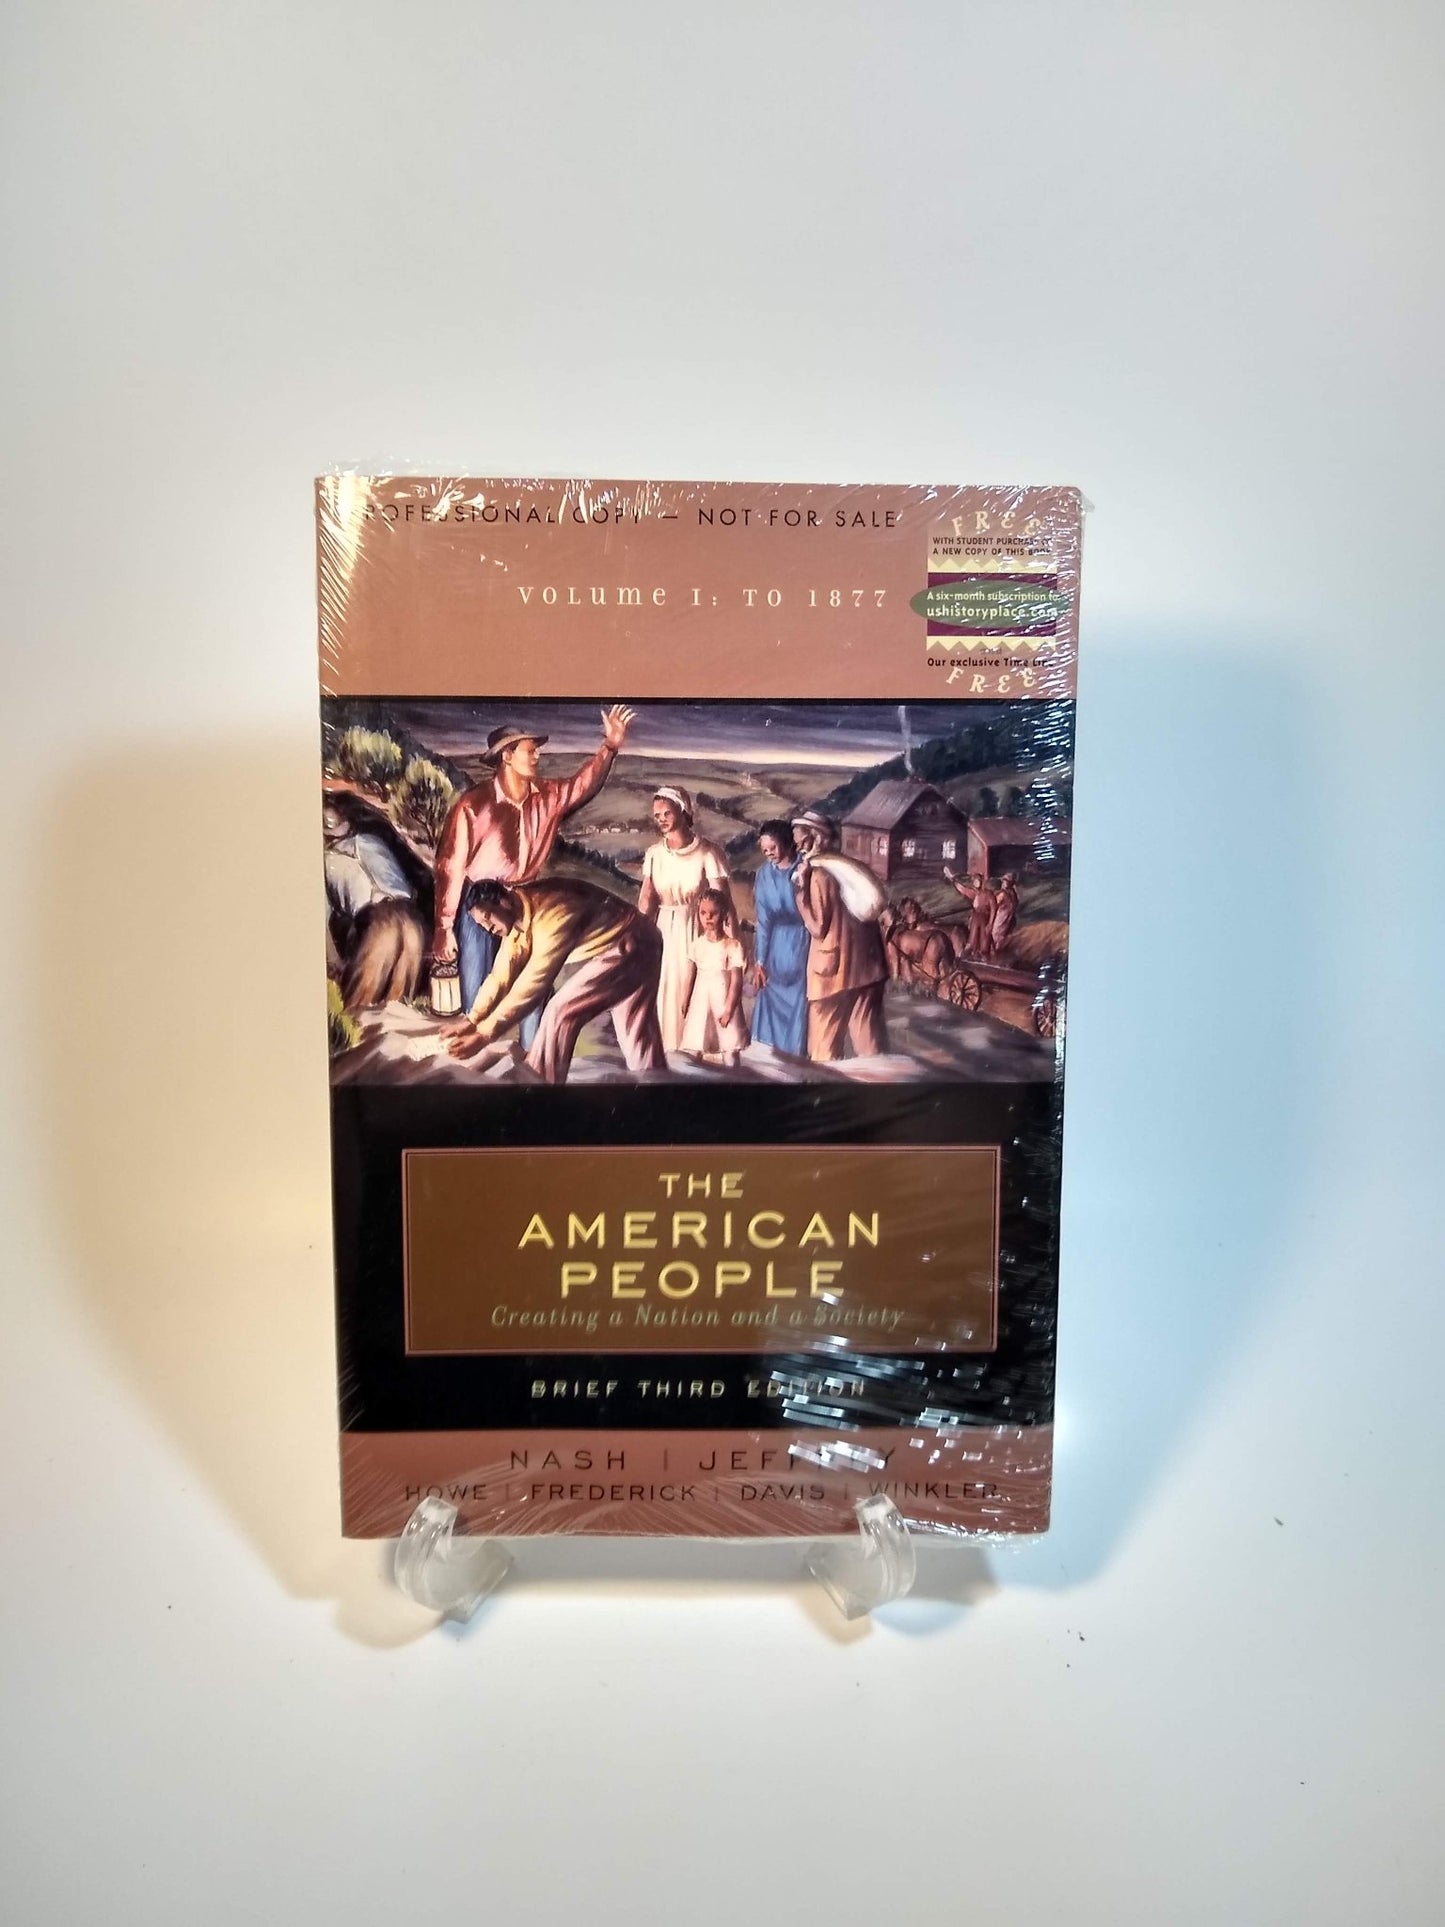 The American People; Volume I: tp 1877 - [ash-ling] Booksellers